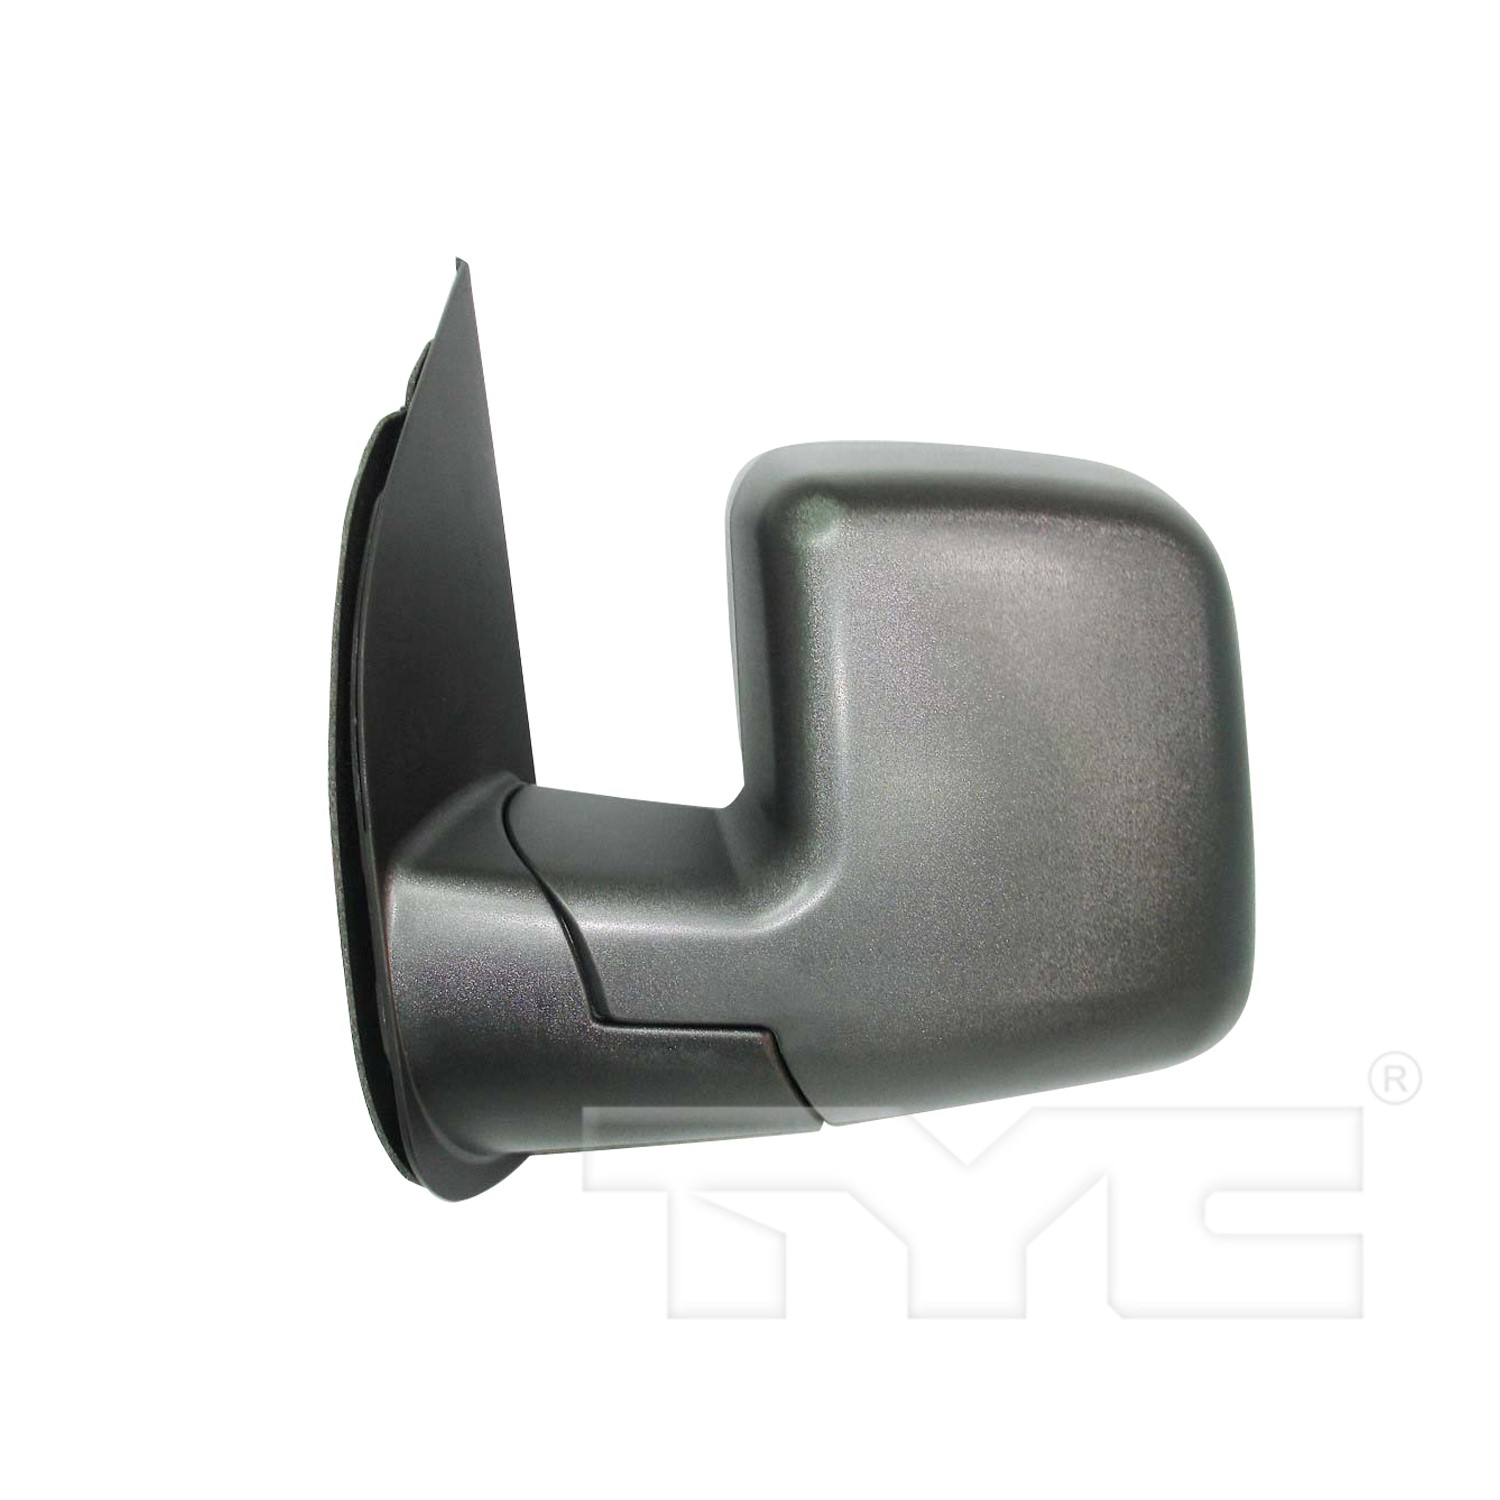 Aftermarket MIRRORS for FORD - E-450 SUPER DUTY, E-450 SUPER DUTY,03-07,LT Mirror outside rear view